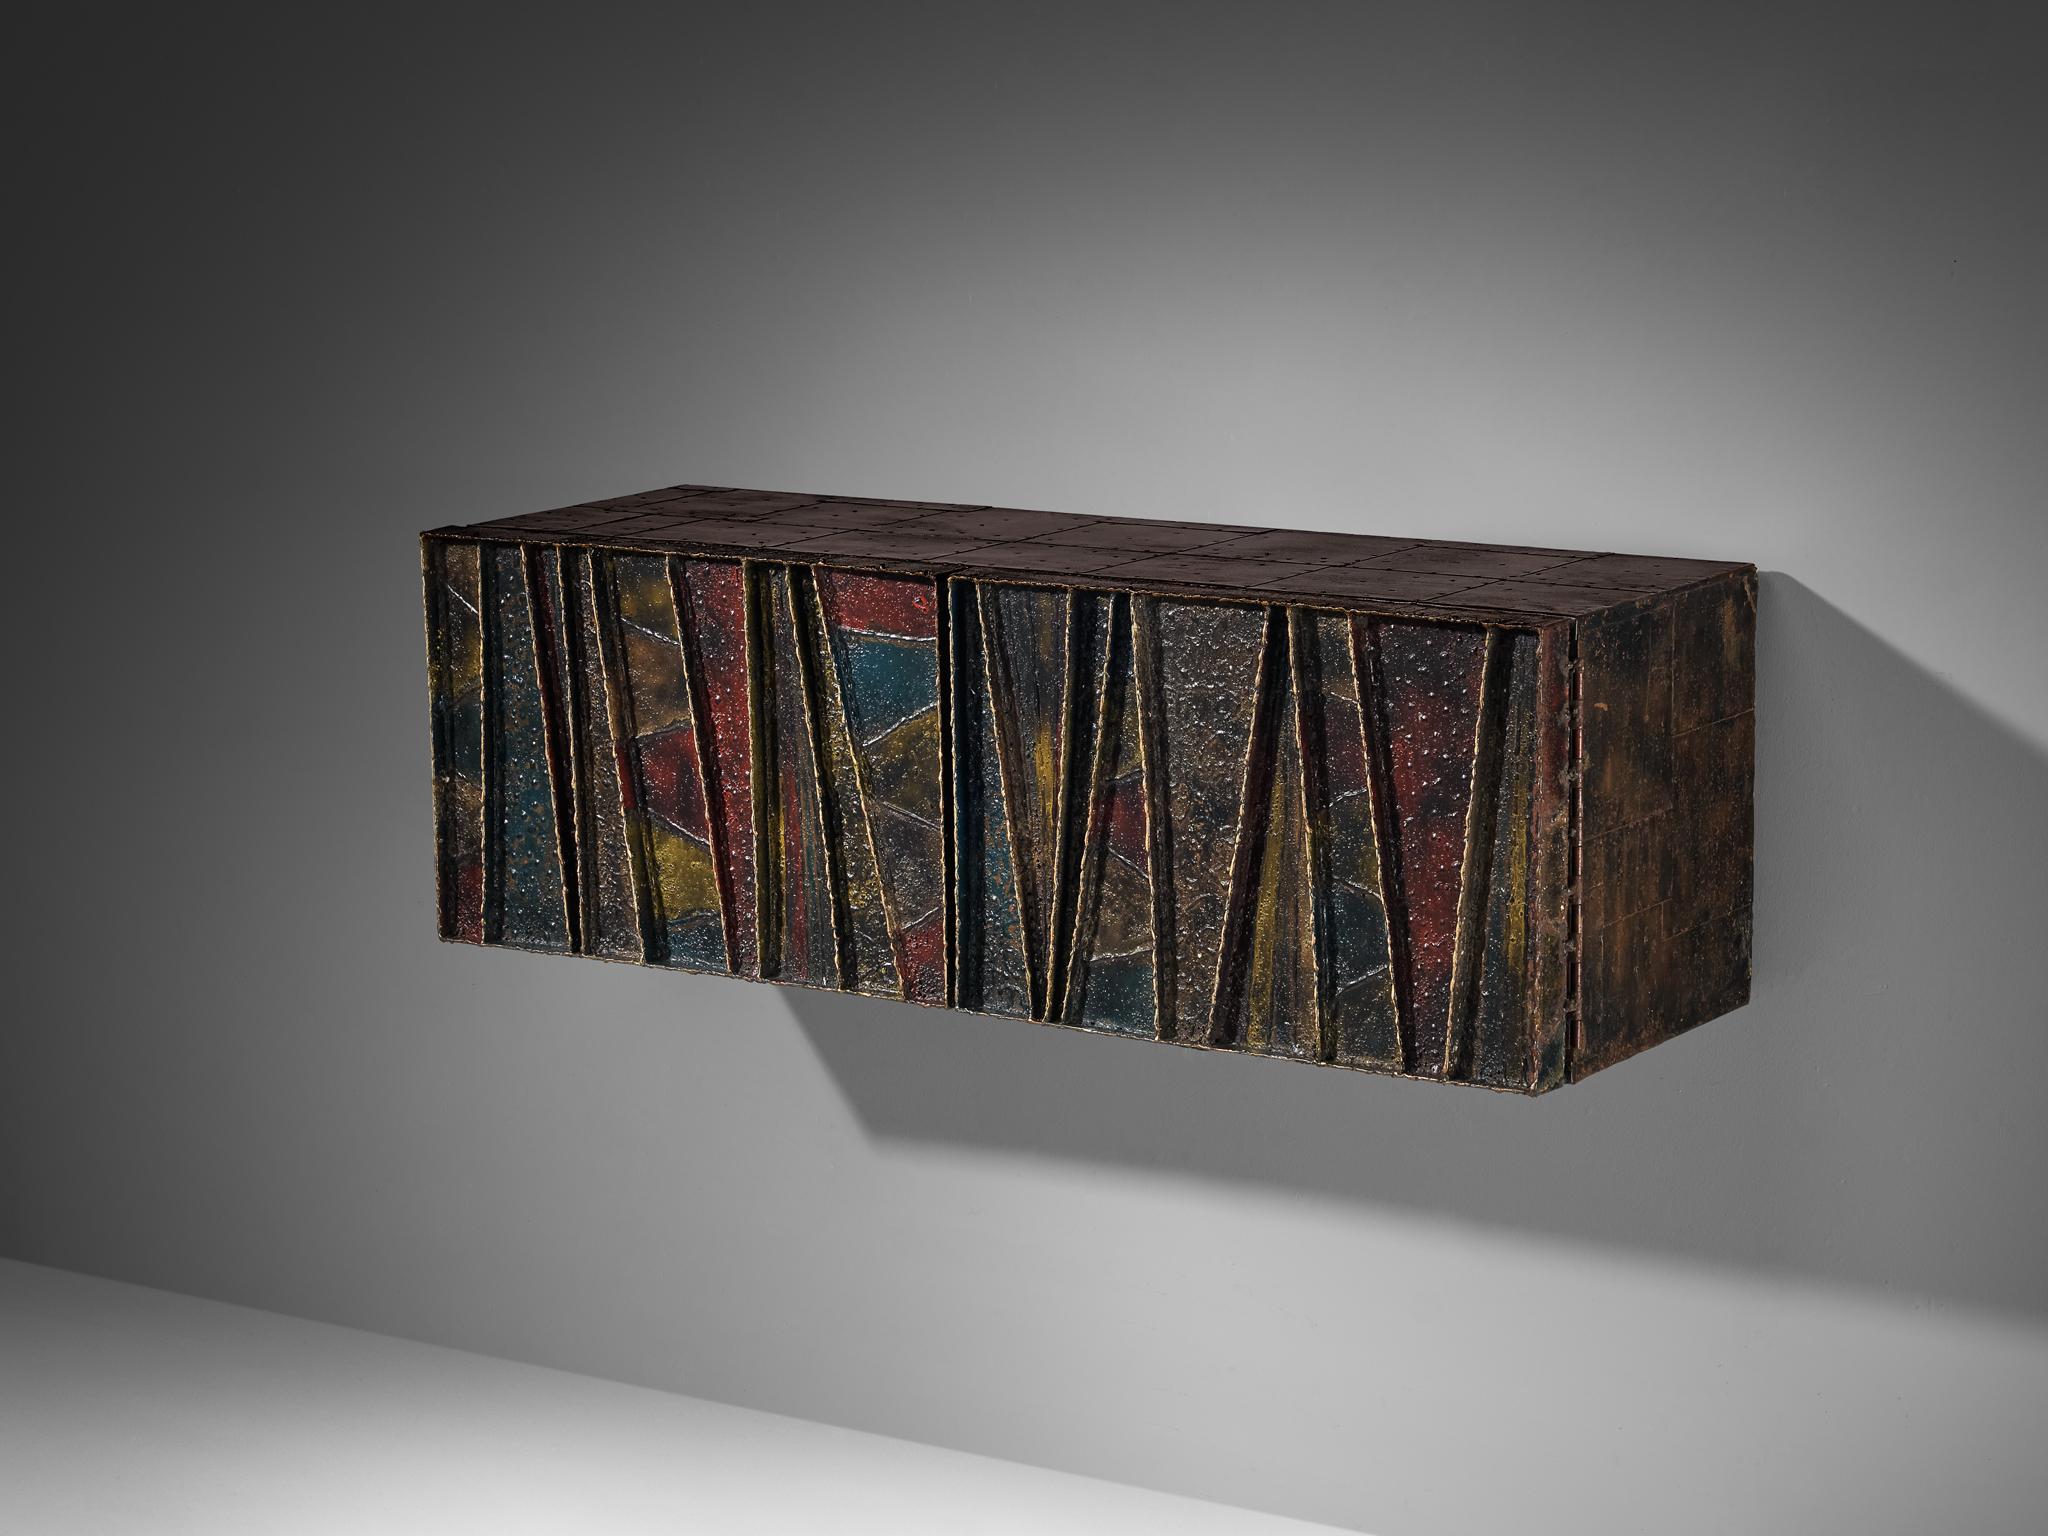 Paul Evans for Directional, 'PE-19' wall-mounted cabinet, welded bronze and steel, painted wood, mirrored glass, glass, United States, 1971

An exceptional design by Paul Evans undeniably breathes artistic excellence combined with impeccable